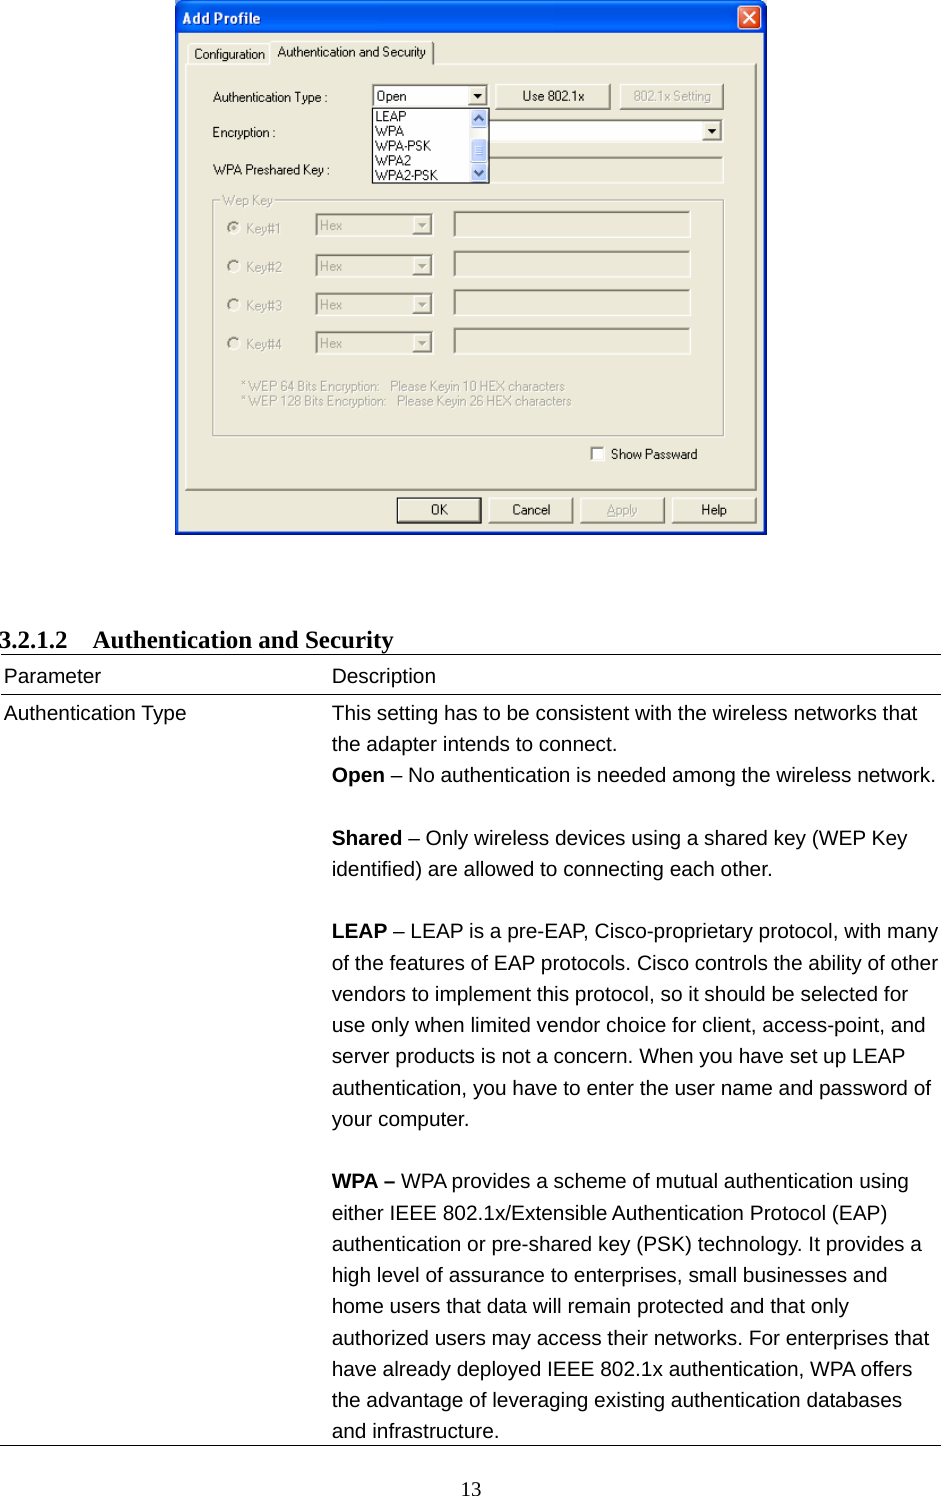  13      3.2.1.2  Authentication and Security Parameter Description Authentication Type  This setting has to be consistent with the wireless networks that the adapter intends to connect. Open – No authentication is needed among the wireless network. Shared – Only wireless devices using a shared key (WEP Key identified) are allowed to connecting each other.    LEAP – LEAP is a pre-EAP, Cisco-proprietary protocol, with many of the features of EAP protocols. Cisco controls the ability of other vendors to implement this protocol, so it should be selected for use only when limited vendor choice for client, access-point, and server products is not a concern. When you have set up LEAP authentication, you have to enter the user name and password of your computer.  WPA – WPA provides a scheme of mutual authentication using either IEEE 802.1x/Extensible Authentication Protocol (EAP) authentication or pre-shared key (PSK) technology. It provides a high level of assurance to enterprises, small businesses and home users that data will remain protected and that only authorized users may access their networks. For enterprises that have already deployed IEEE 802.1x authentication, WPA offers the advantage of leveraging existing authentication databases and infrastructure.   